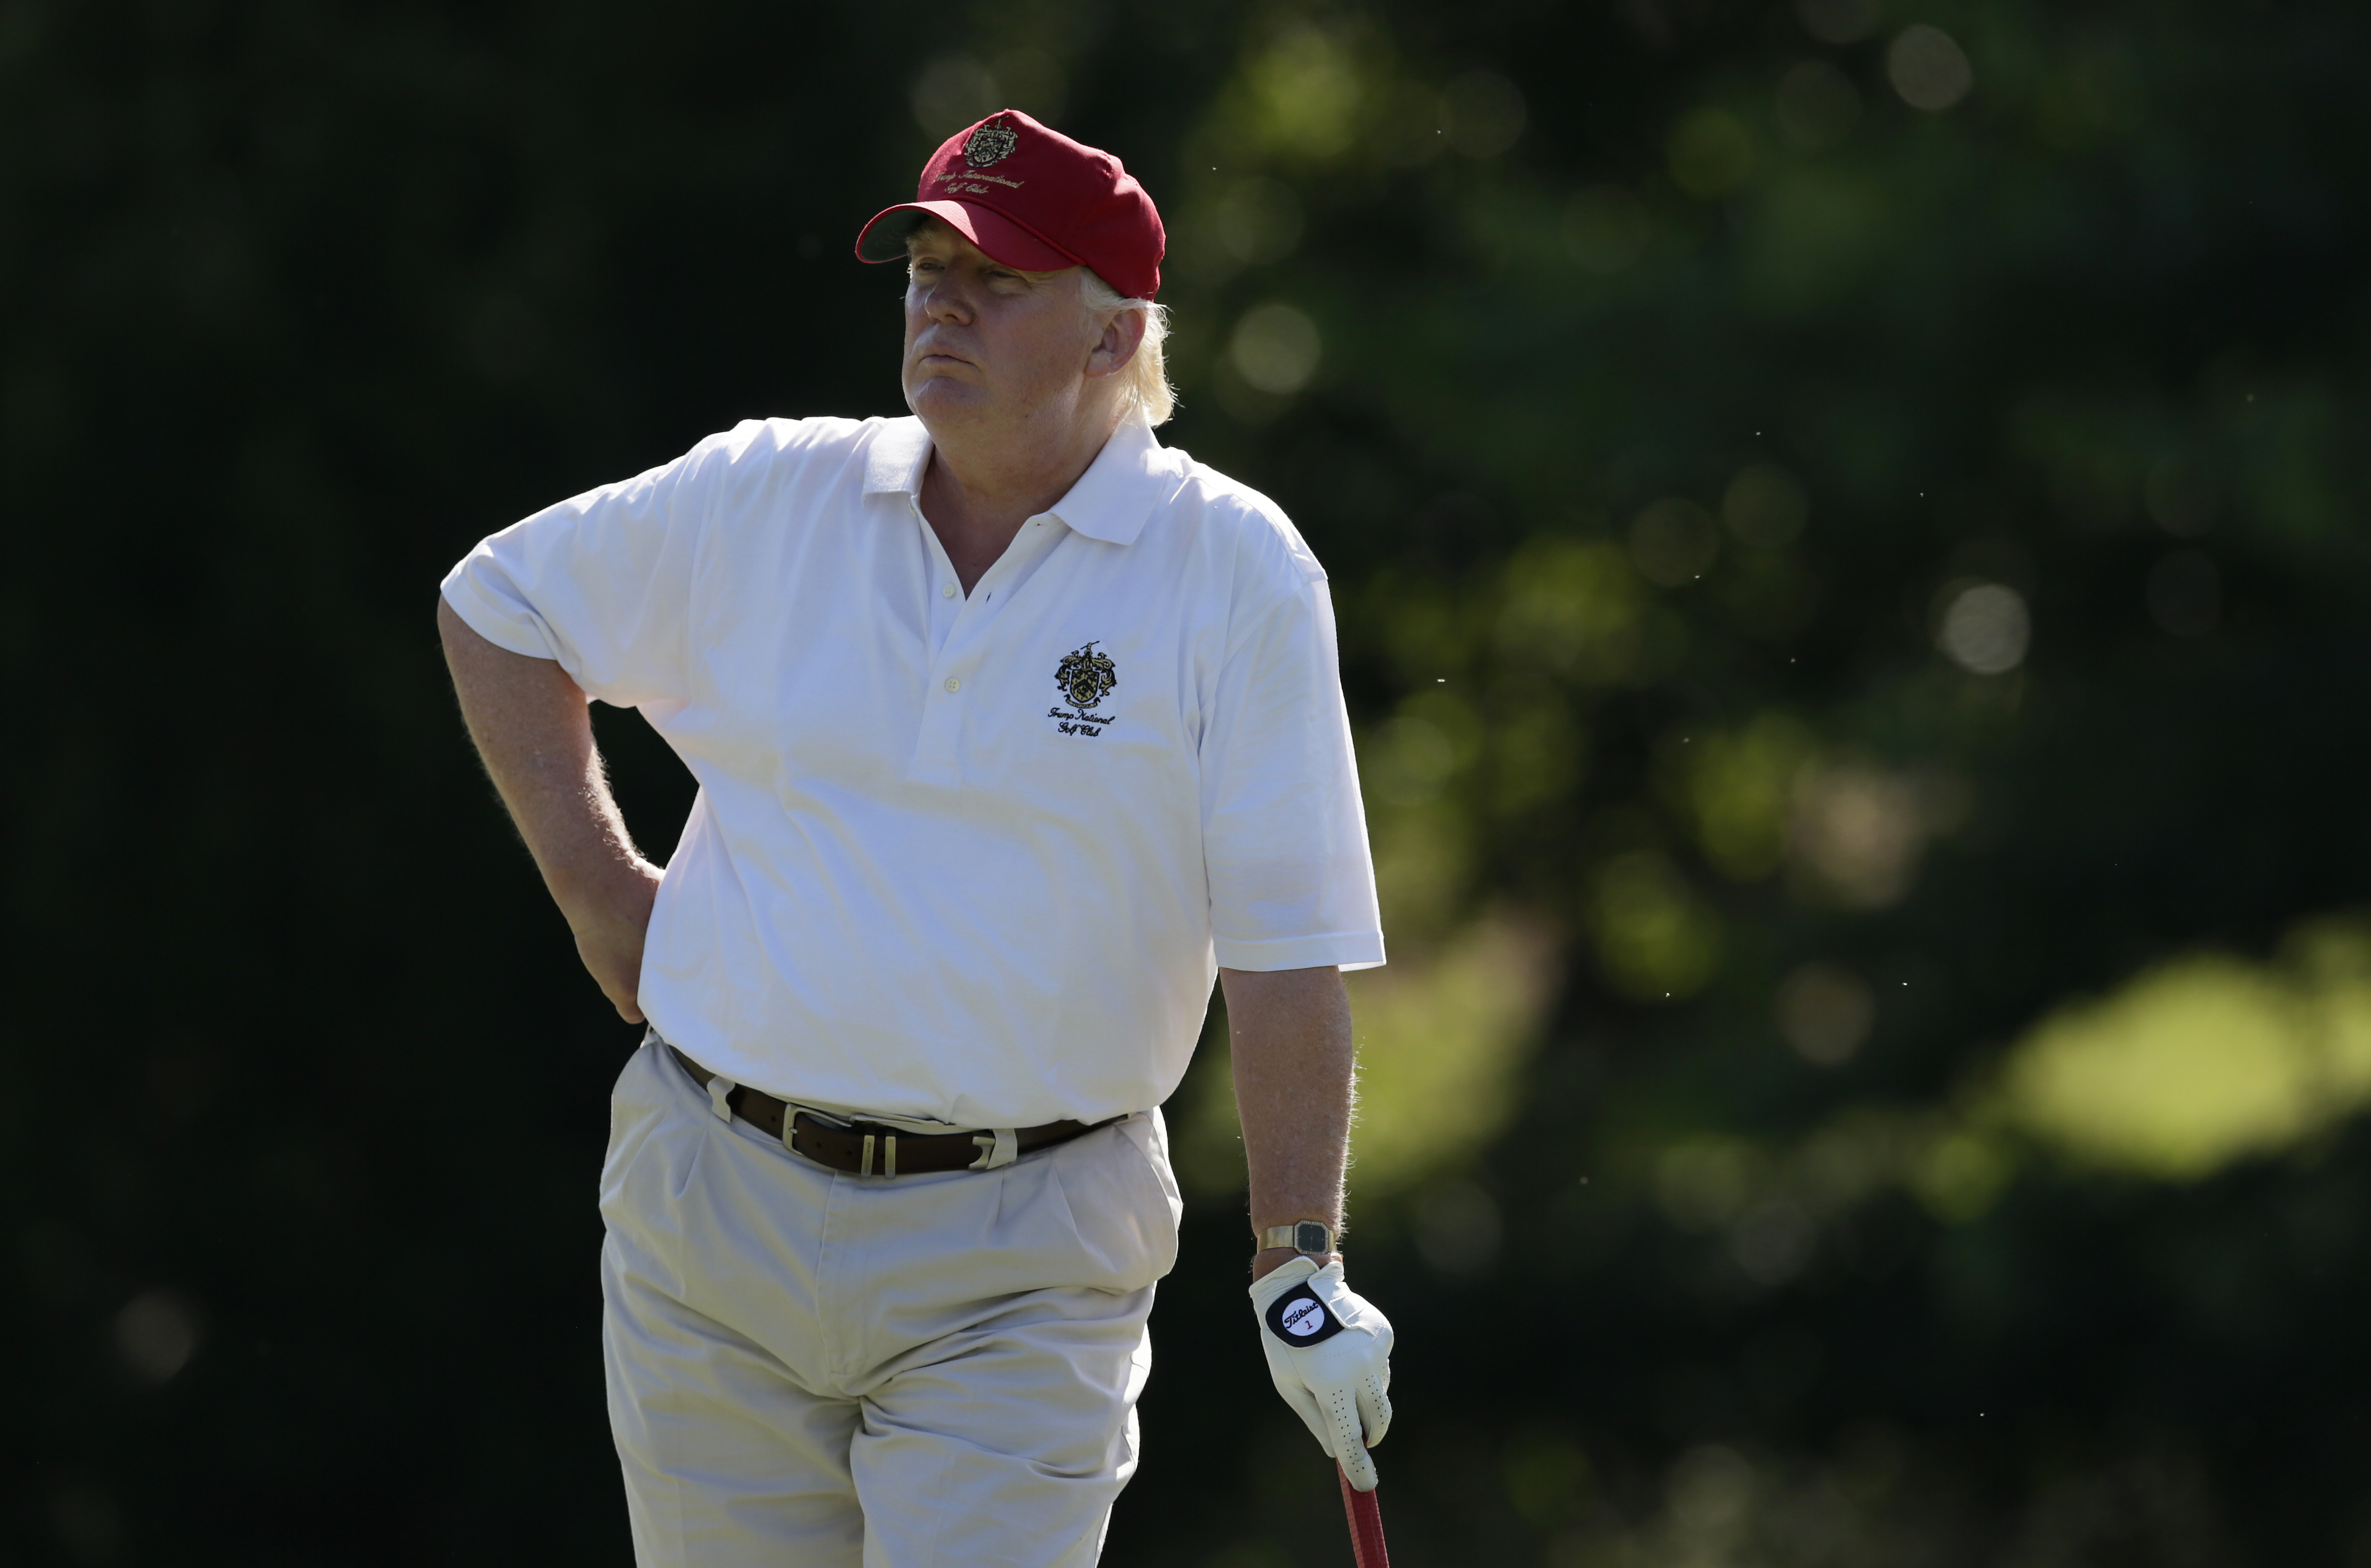 Donald Trump during a pro-am round of the AT&amp;T National golf tournament in Bethesda, Md. on June 27, 2012. (Patrick Semansky—AP)